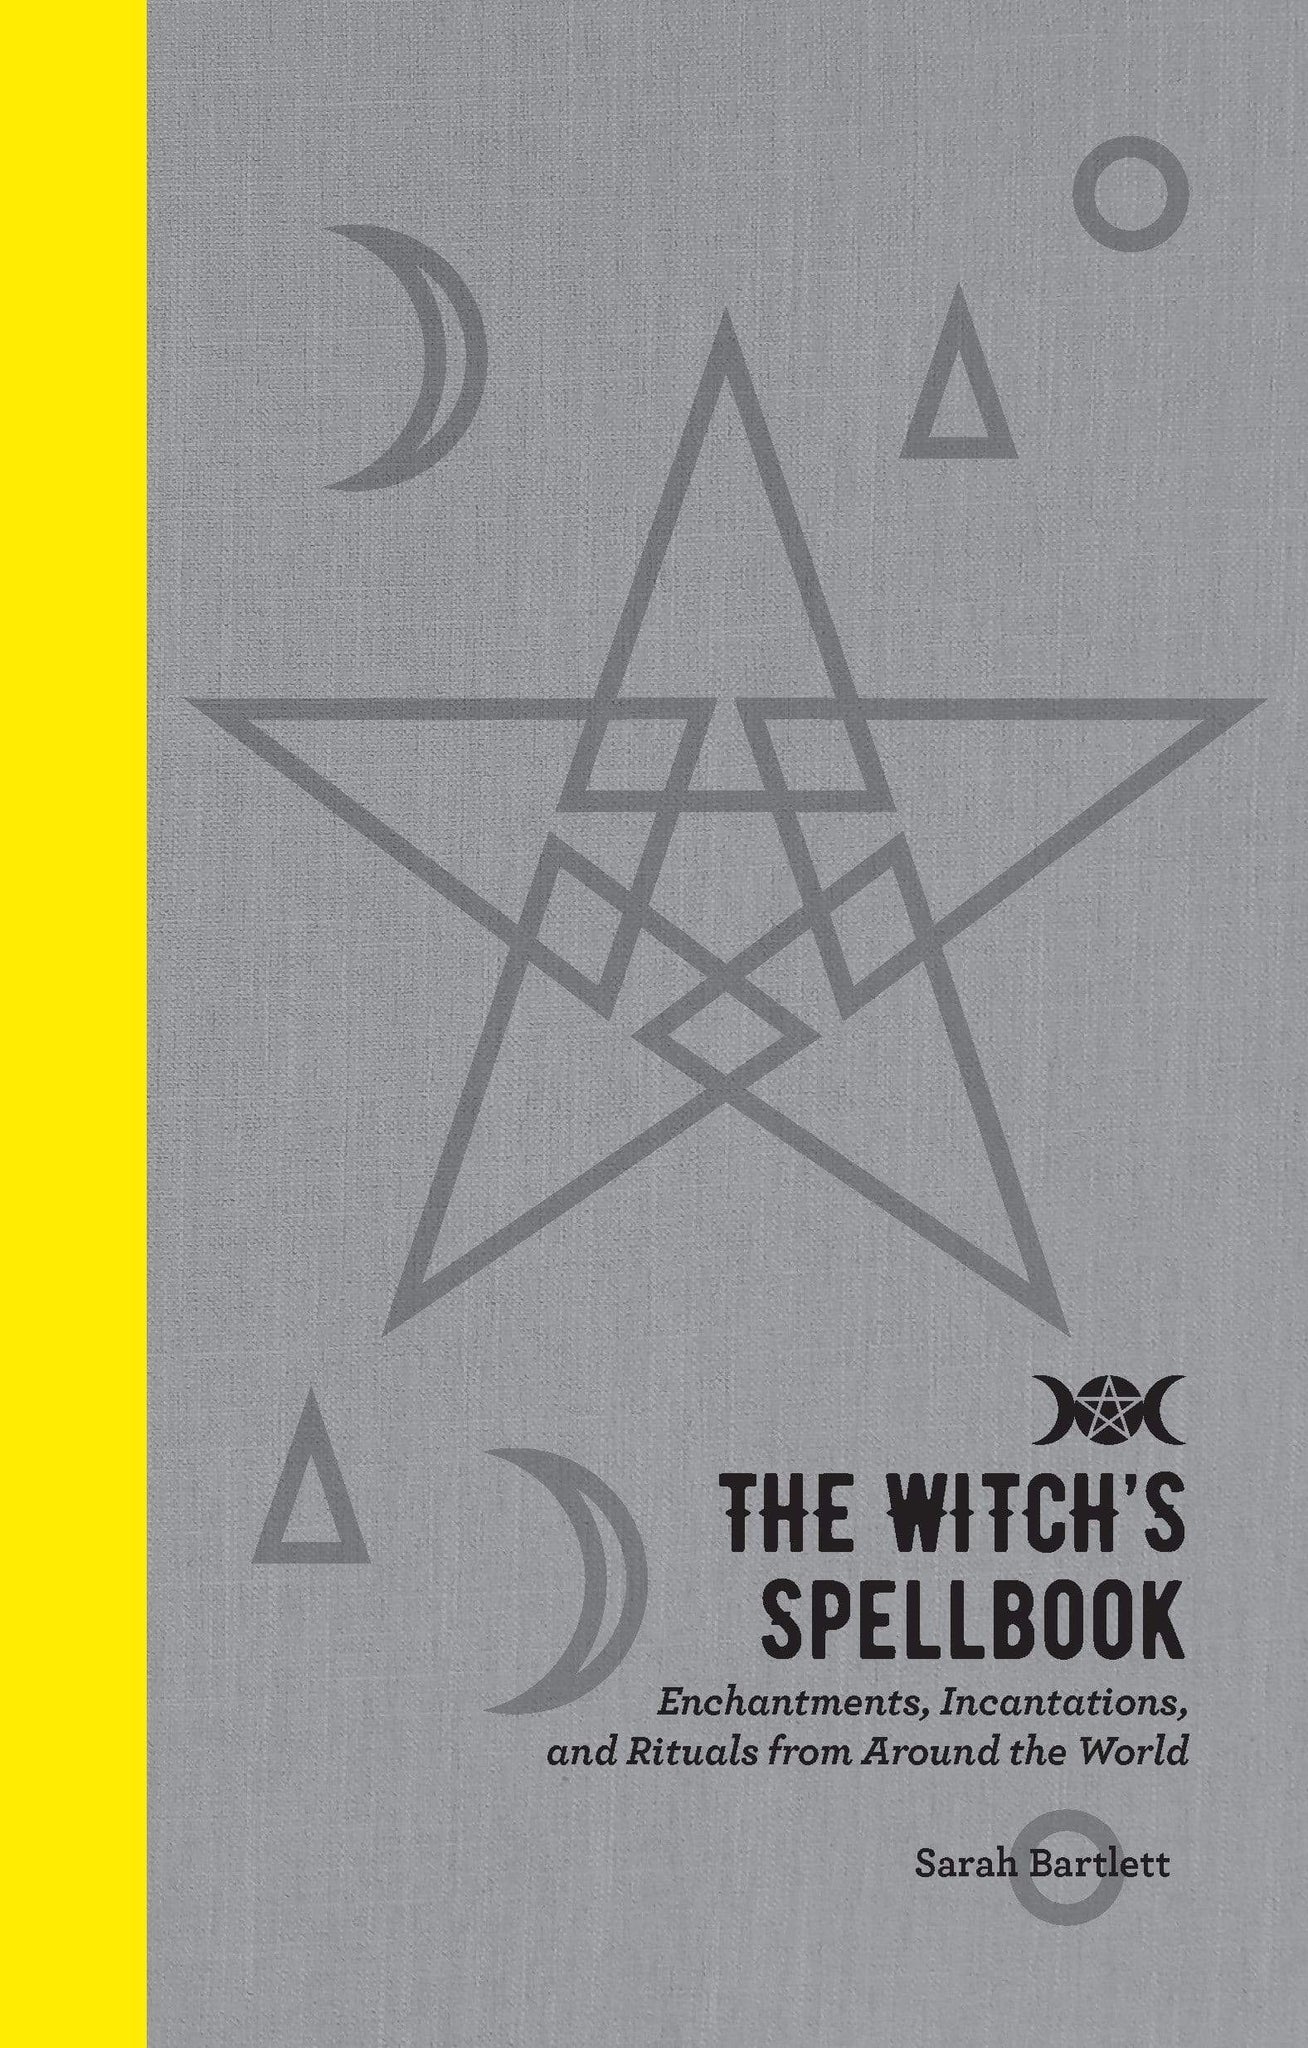 The Witch's Spellbook by Sarah Bartlett